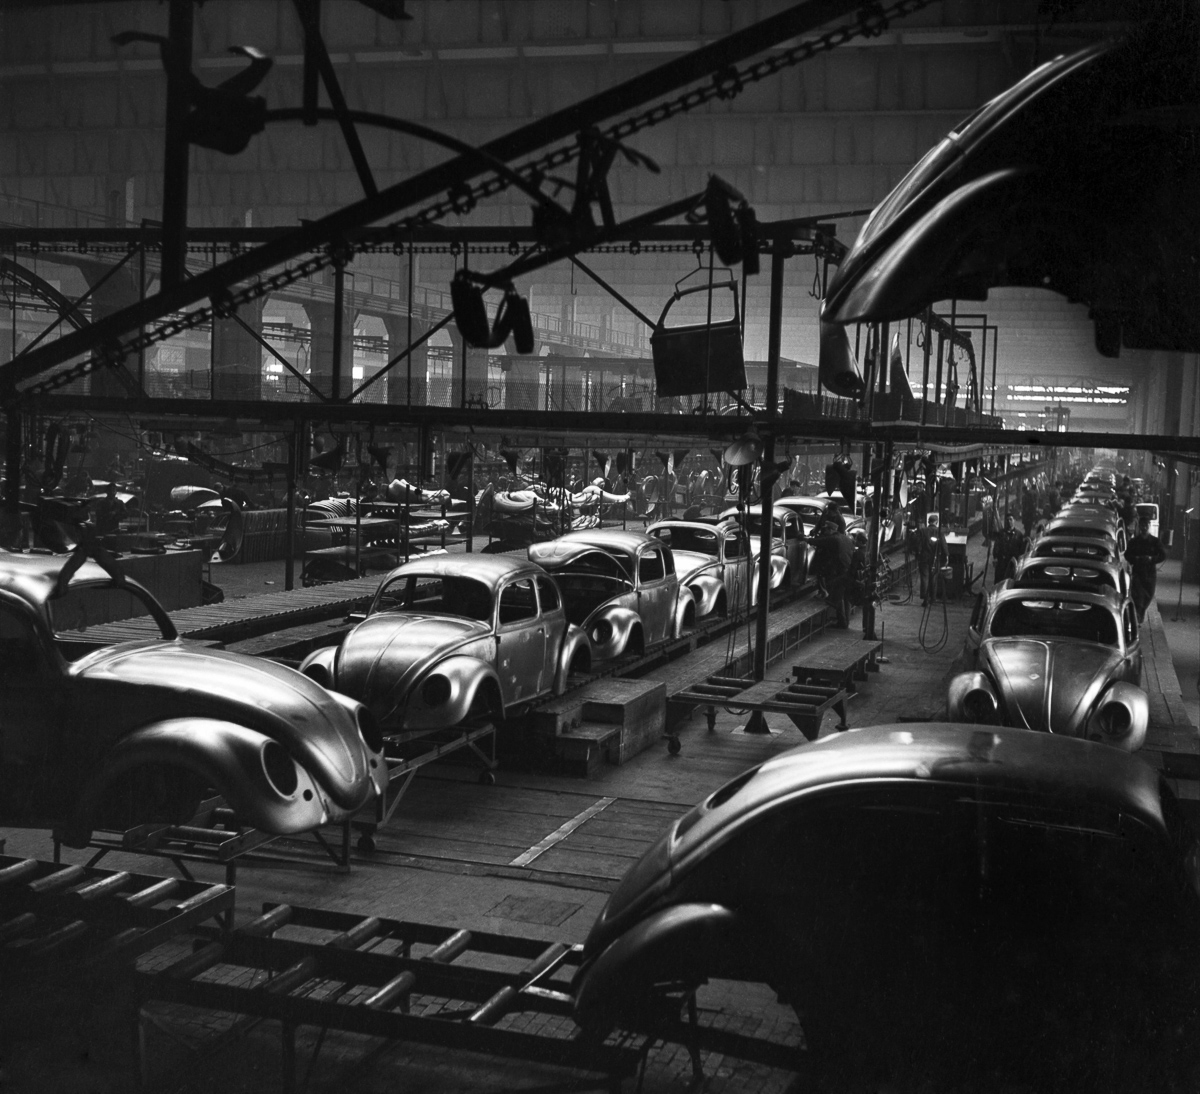 15 Dec 1952 --- General views of the production line at the volkswagen factory producing Beetle cars in Germany. December 1952 C6101-002 --- Image by © WATFORD/Mirrorpix/Corbis